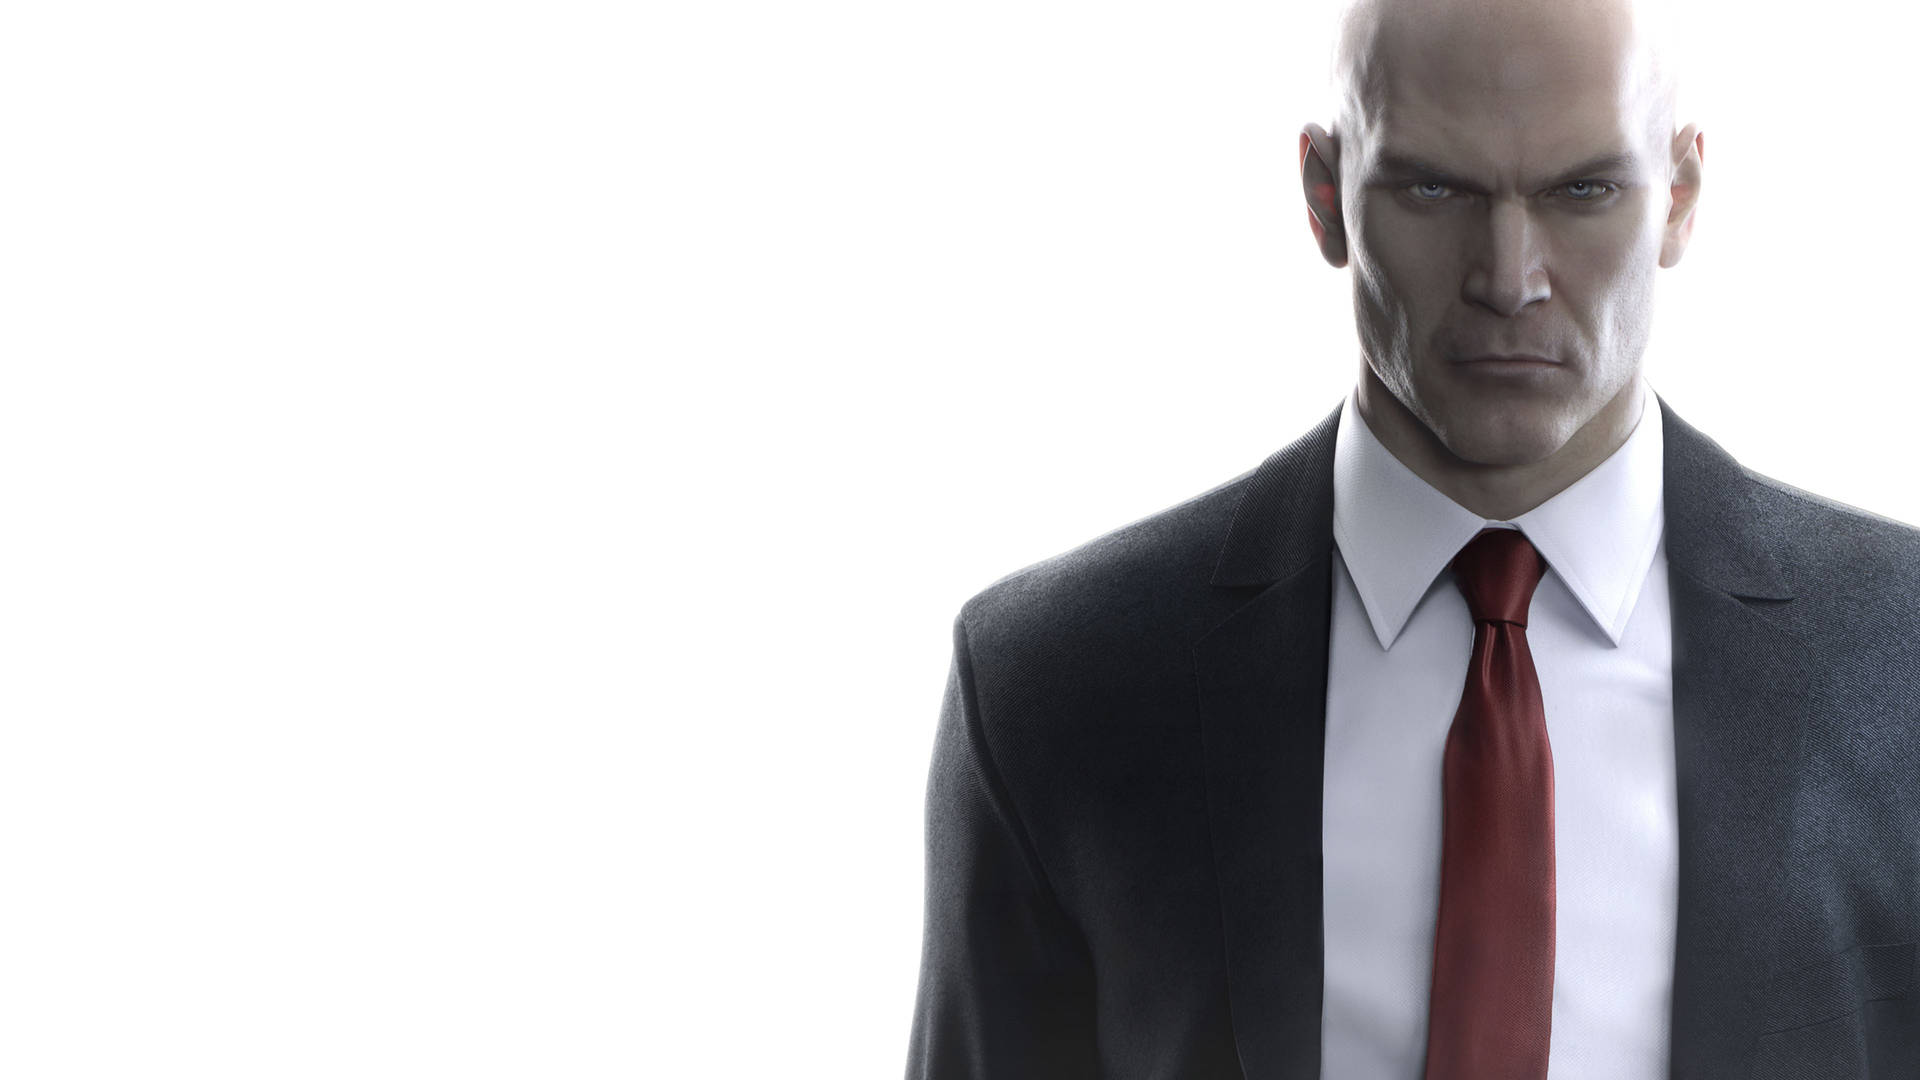 Hitman With Serious Expression Background